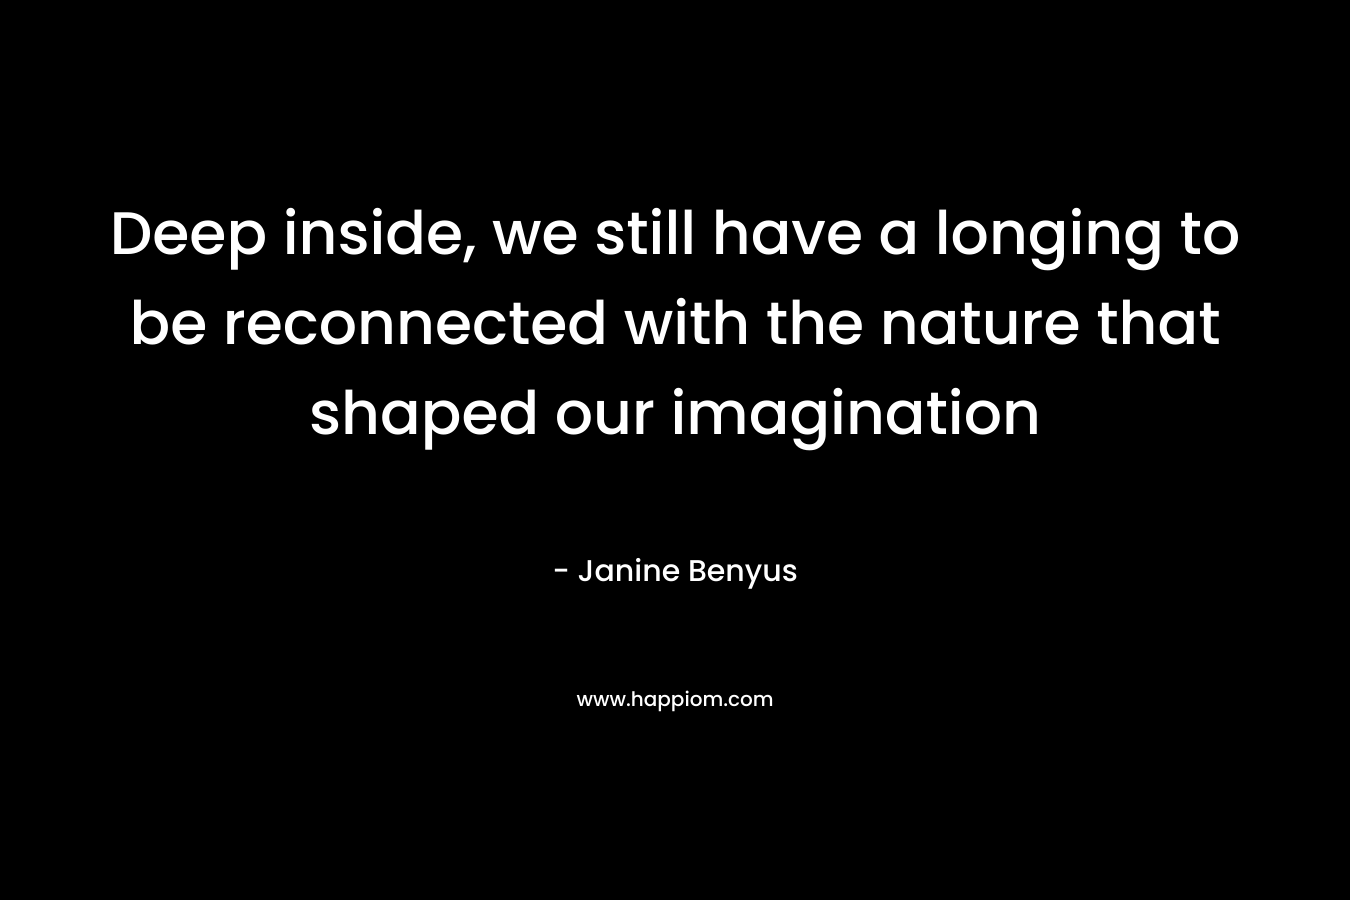 Deep inside, we still have a longing to be reconnected with the nature that shaped our imagination